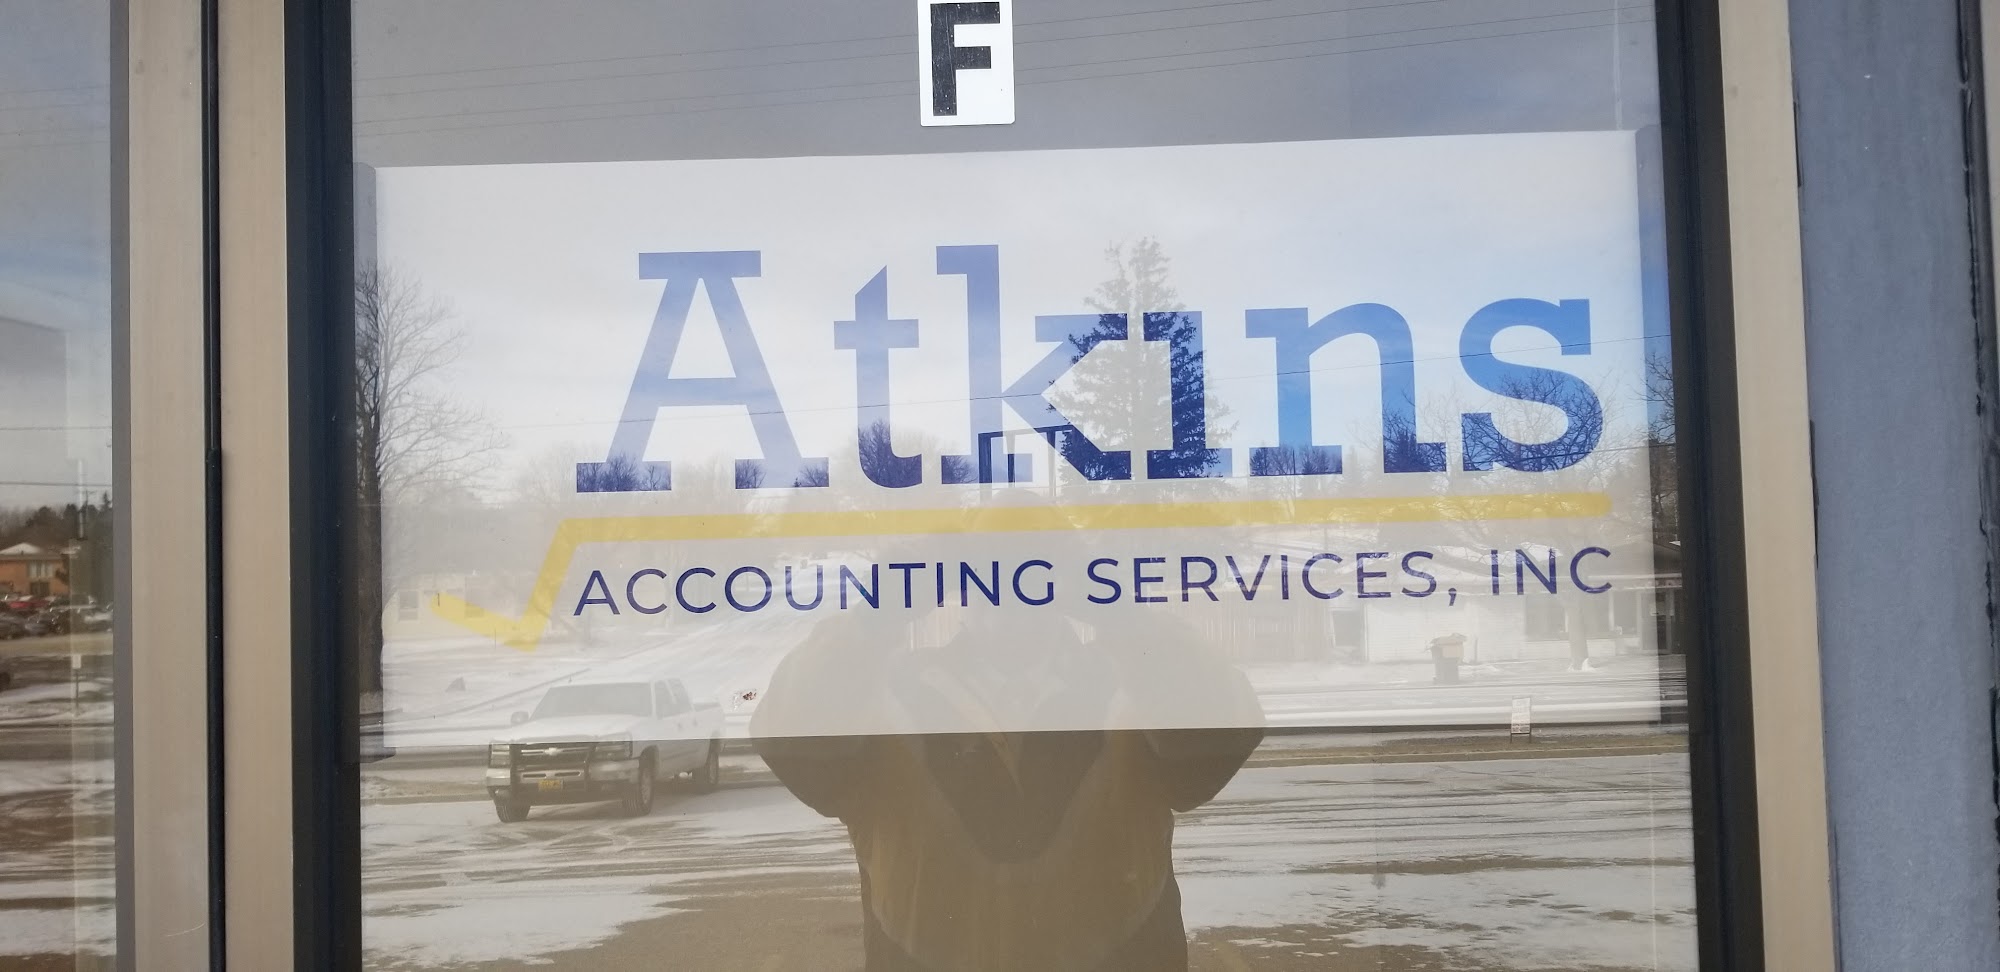 Atkins Accounting Services, Inc.